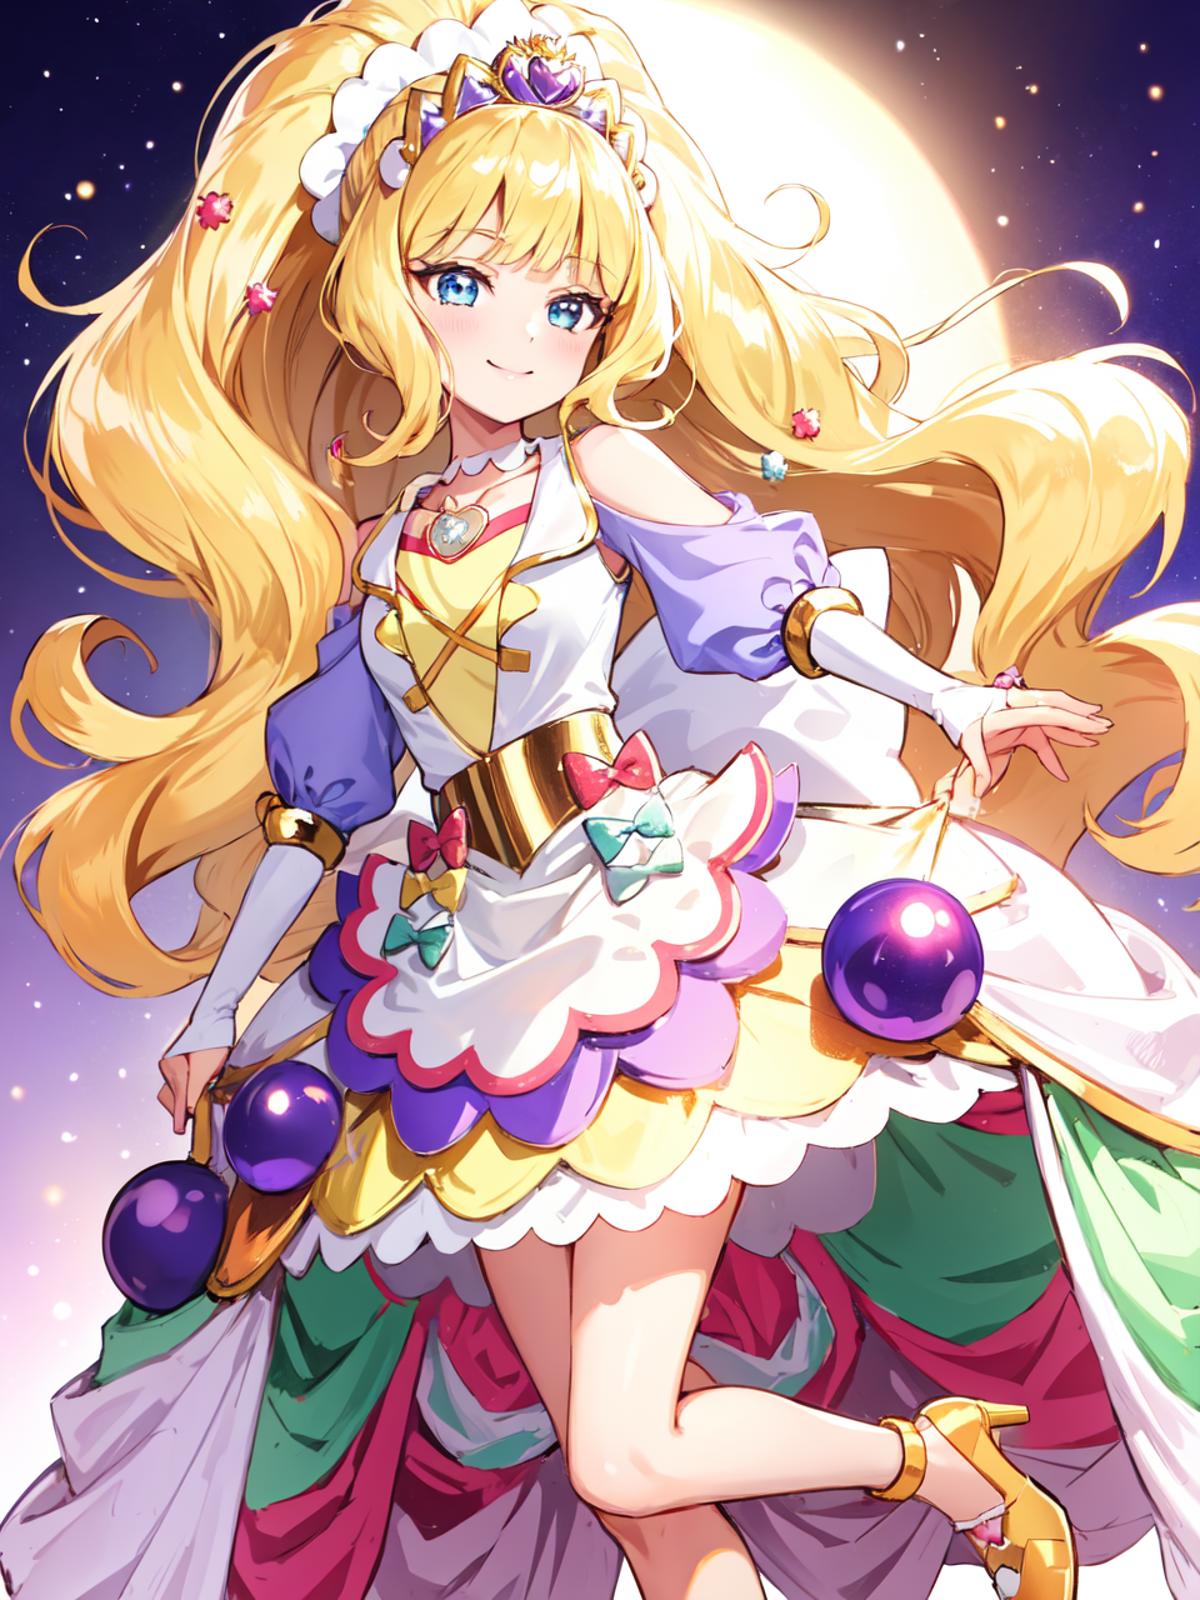 Cure Finale (Delicious Party♡Pretty Cure) デリシャスパーティ♡プリキュア キュアフィナーレ image by secretmoon